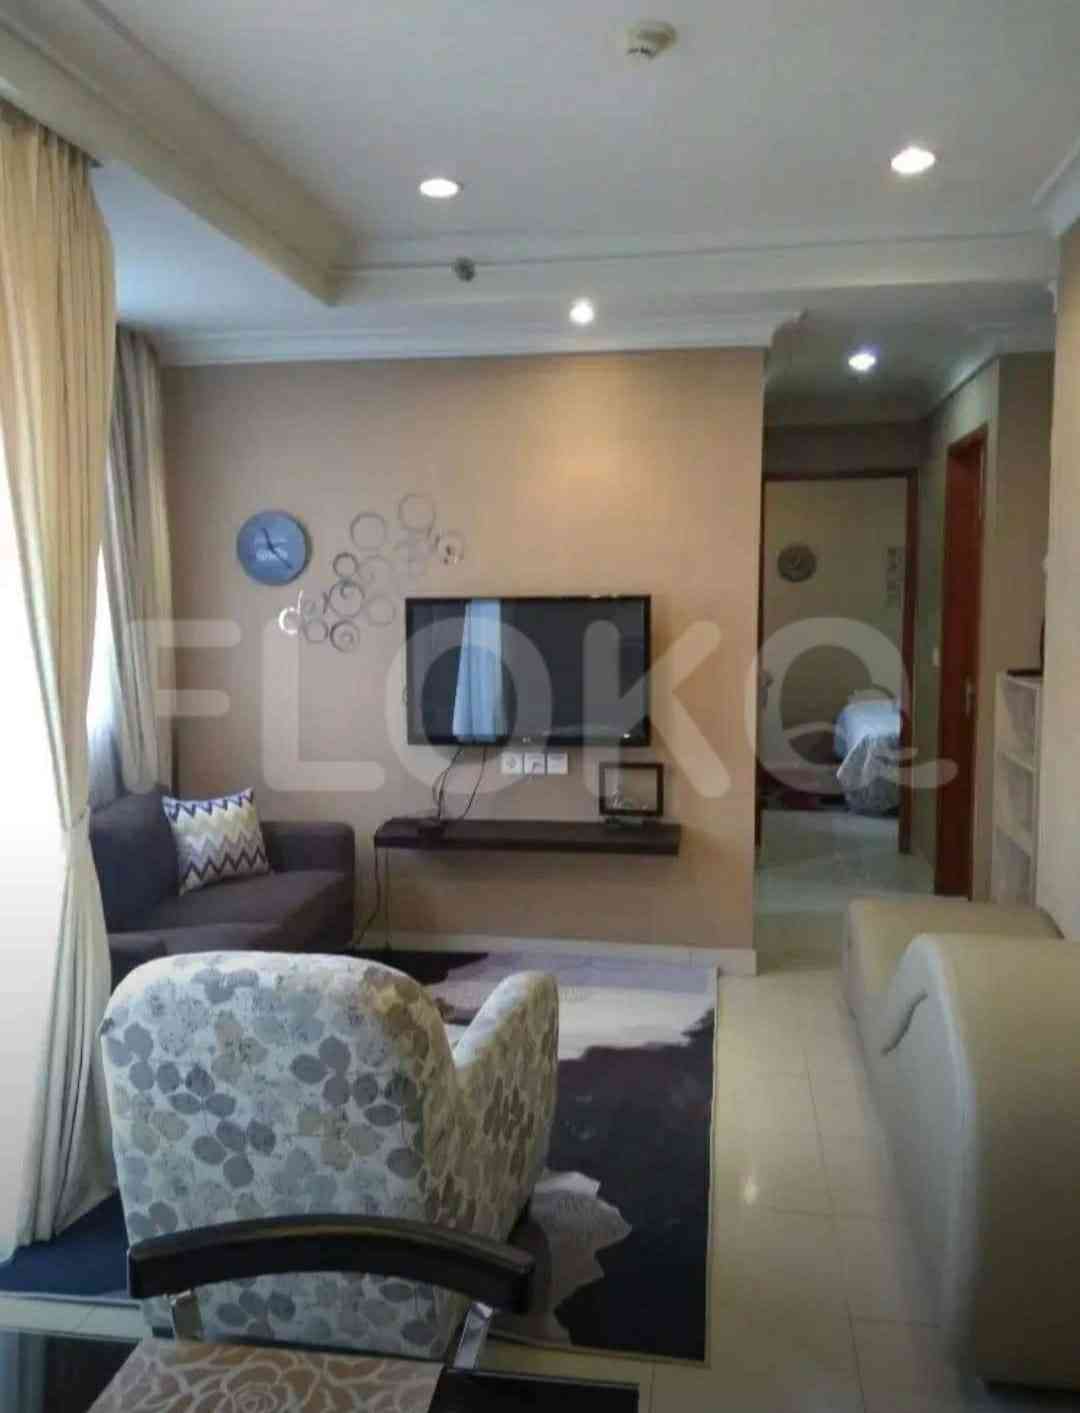 2 Bedroom on nullth Floor for Rent in Kuningan Place Apartment - fku453 2